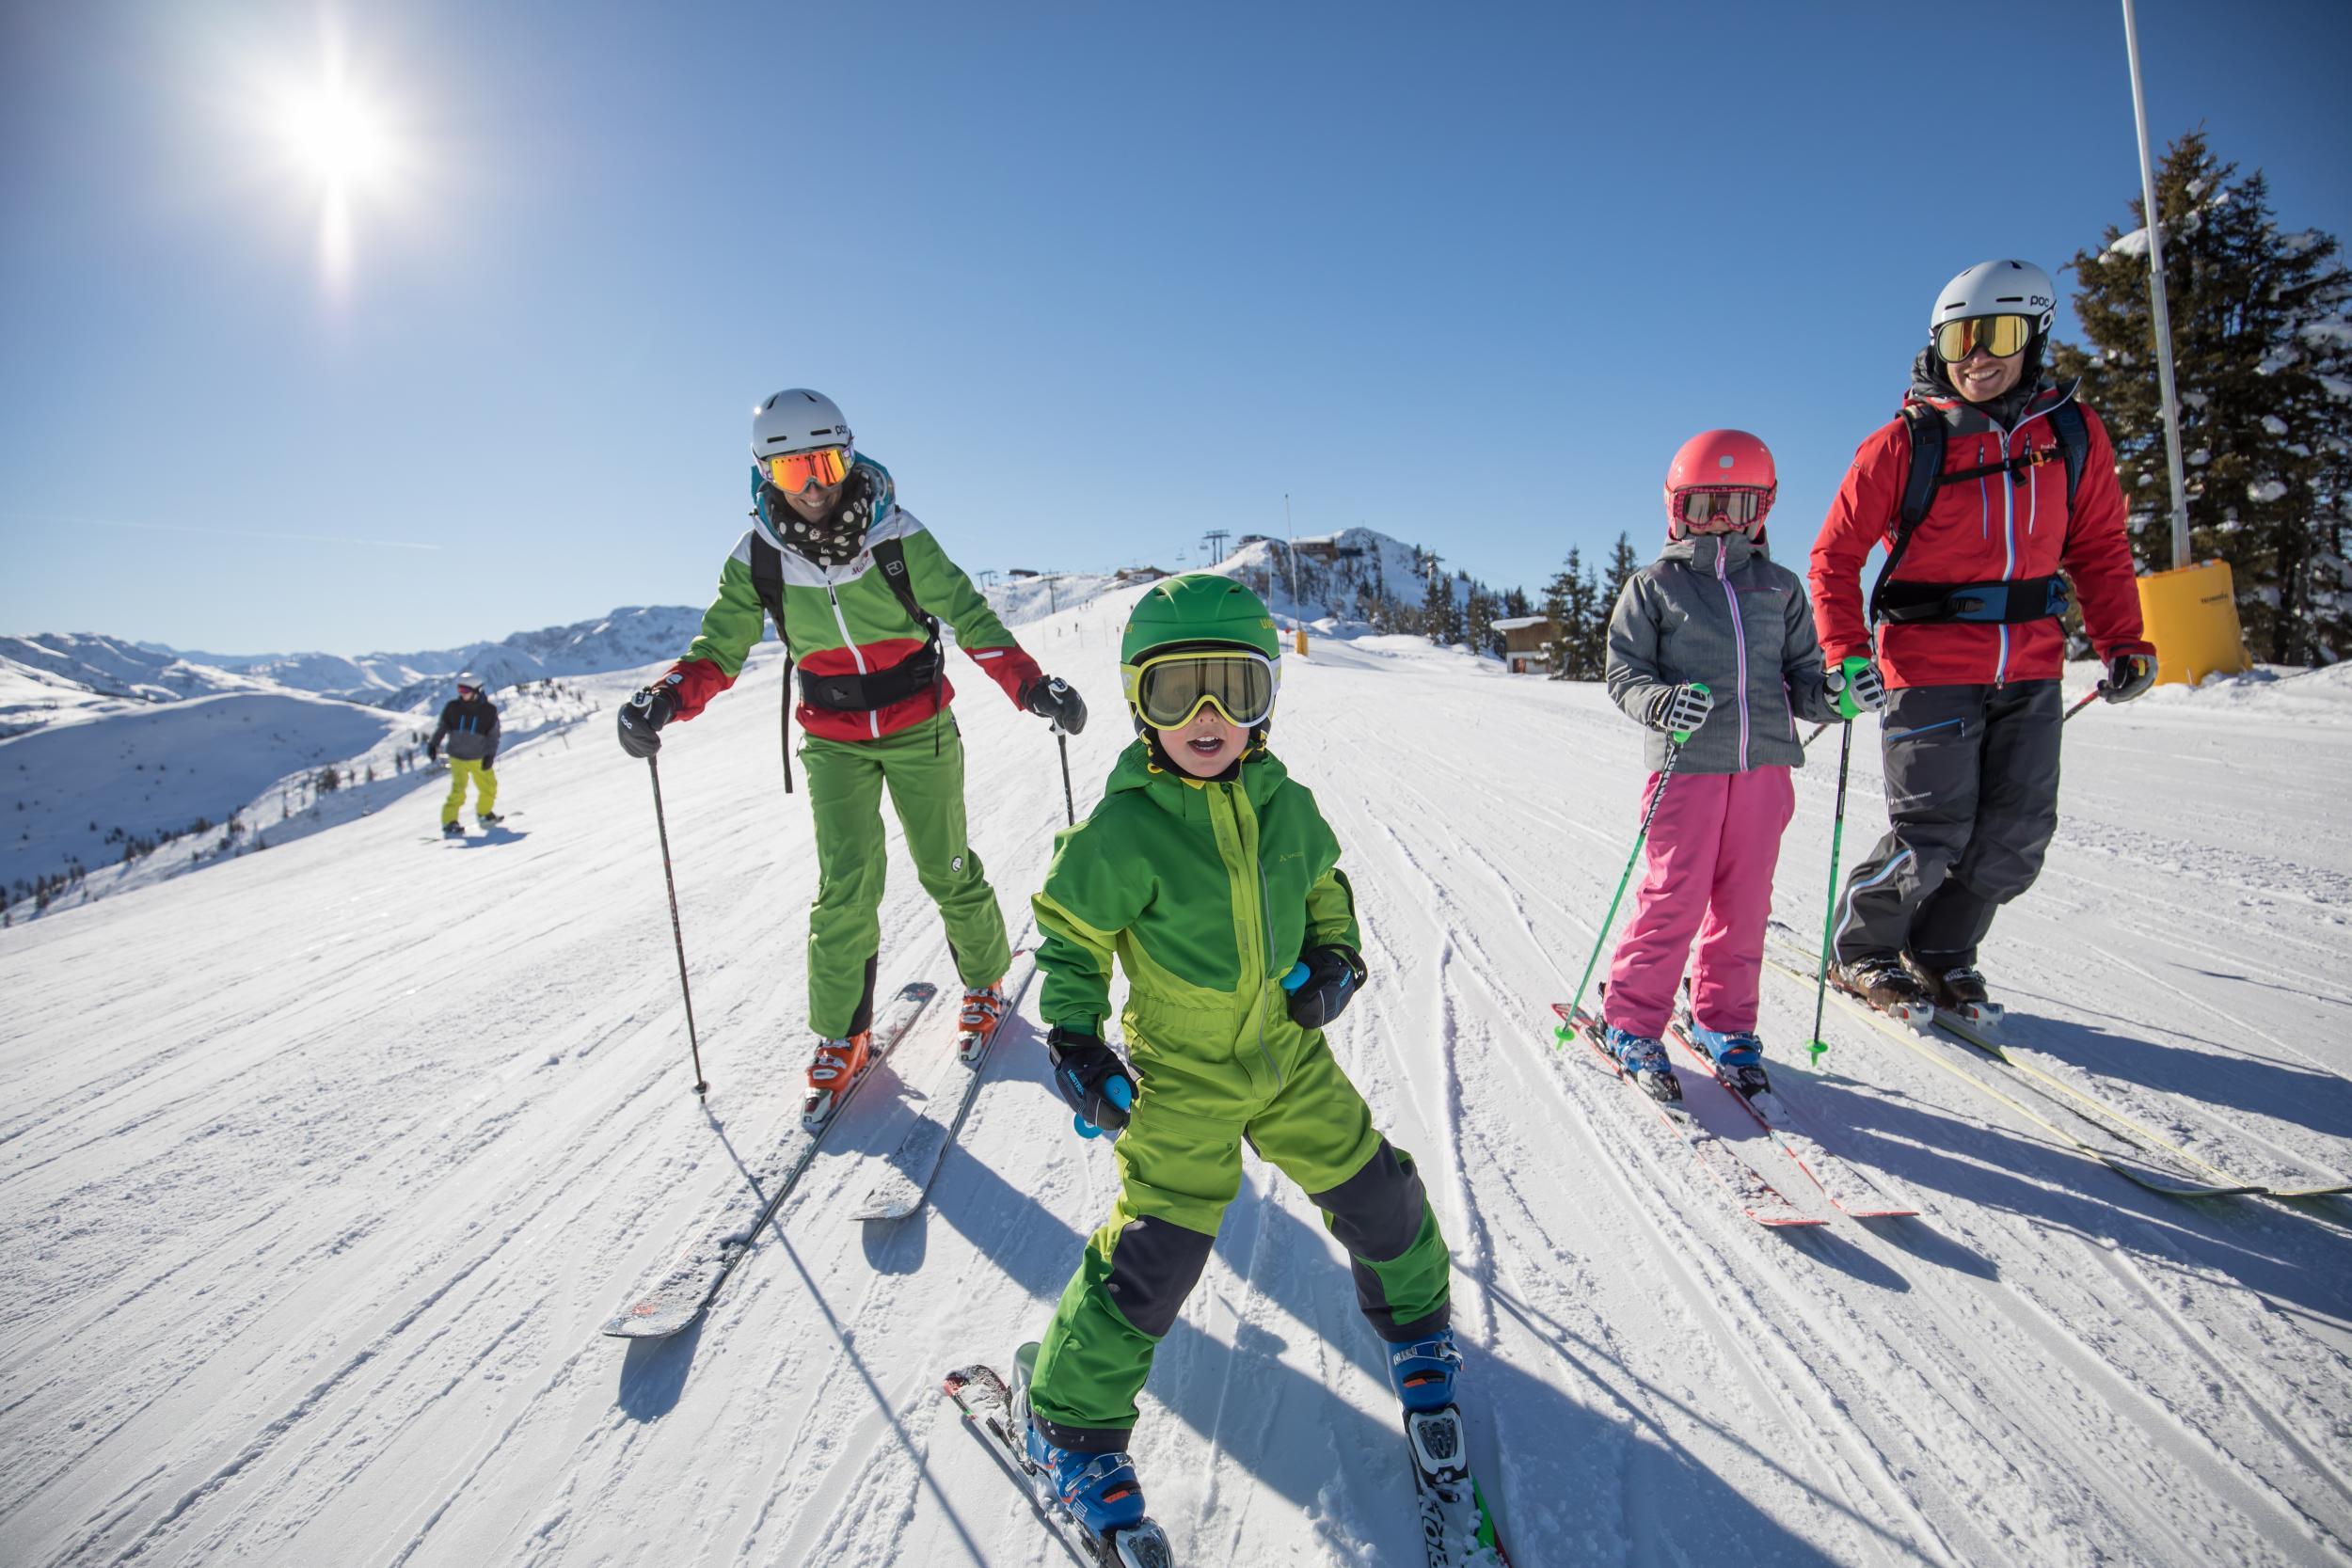 The resort has slopes suitable for all ages and abilities